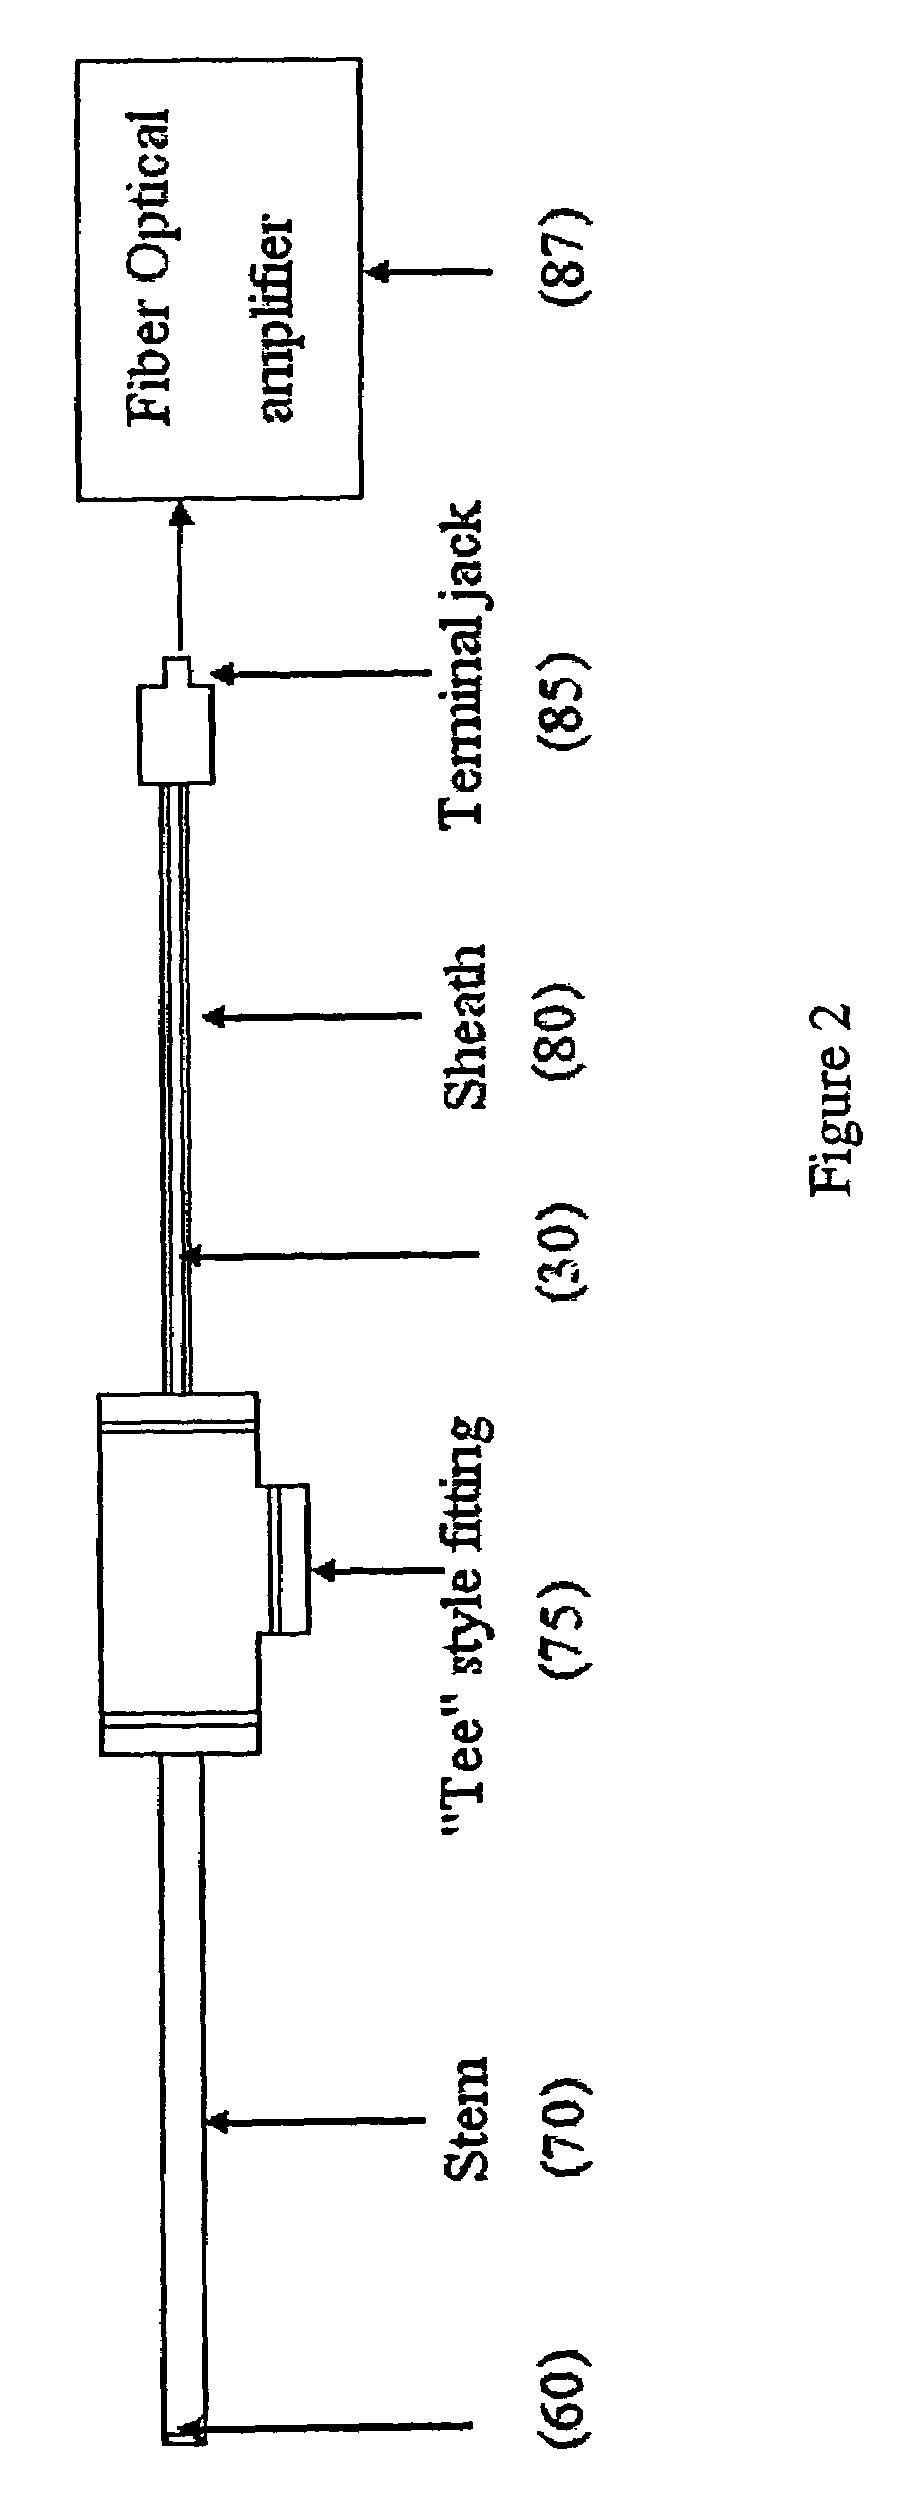 Online fiber optic sensor for detecting partial discharge and similar events in large utility station transformers and the like